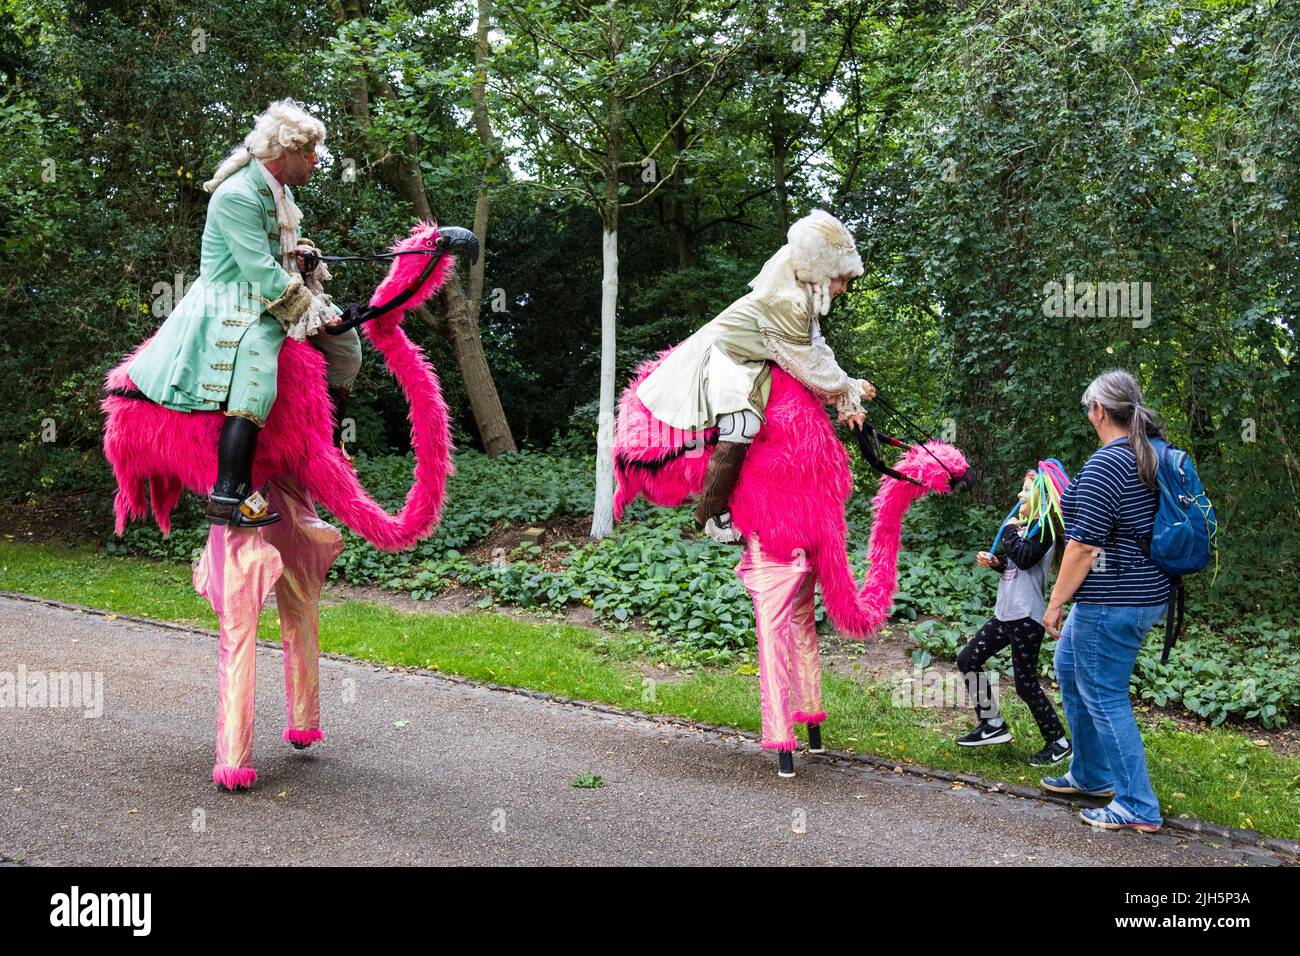 Bremen carnival with stilt walkers in colourful flamingo costumes, masks and samba rhythms, Bremen, Germany, Europe Stock Photo